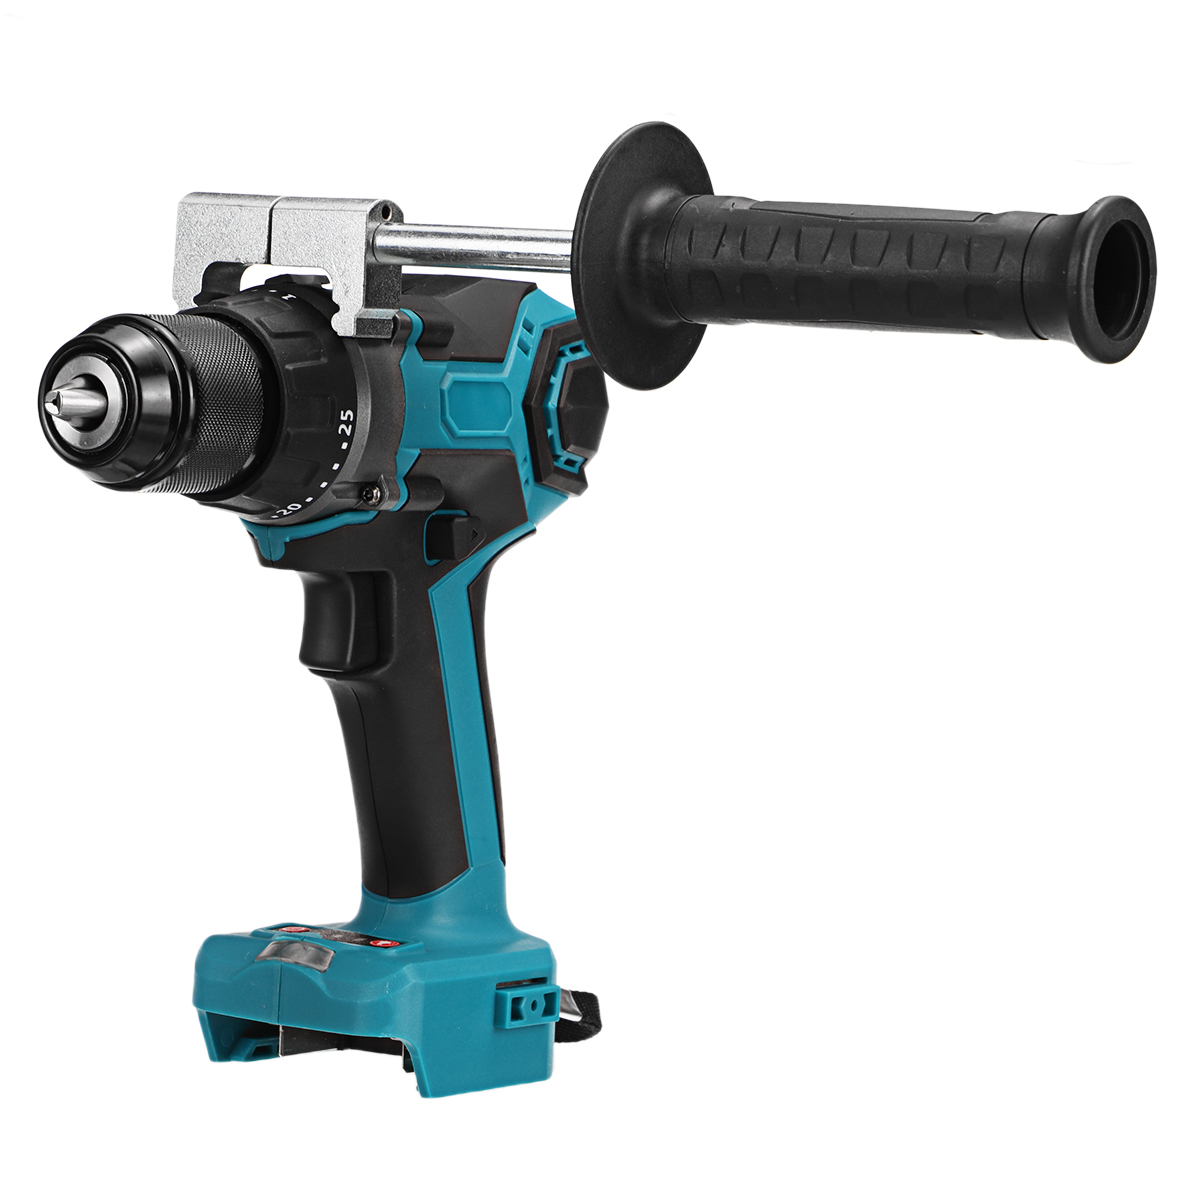 3-IN-1-Brushless-Electric-Hammer-Drill-Screwdriver-13mm-253-Torque-Cordless-Impact-Drill-For-Makita--1861682-8